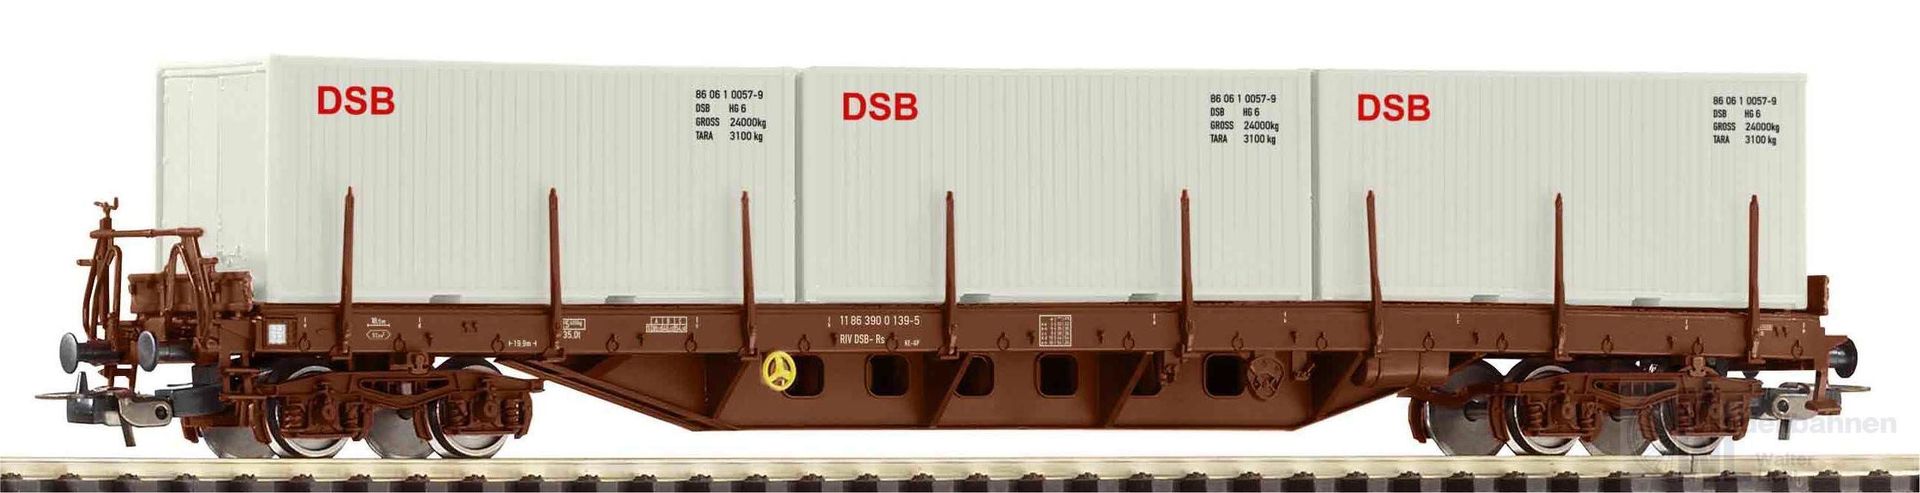 Piko 24527 - Containertragwagen DSB Ep.IV Typ Rs baladen mit 3 Containern H0/GL